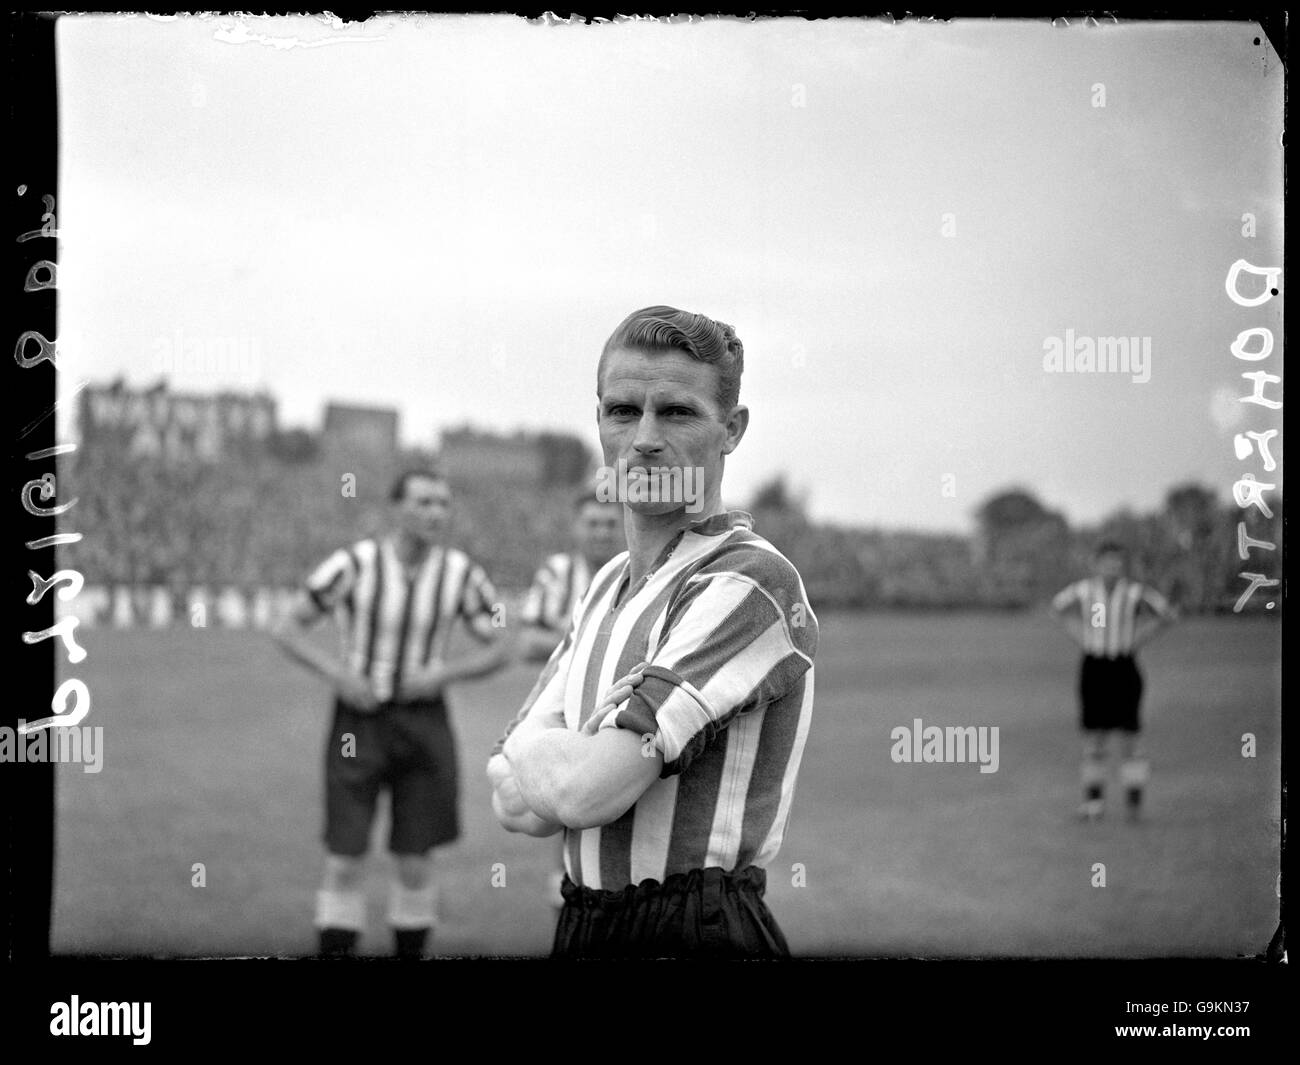 Soccer - Wartime League South - Brentford. Peter Doherty, guesting for Brentford Stock Photo